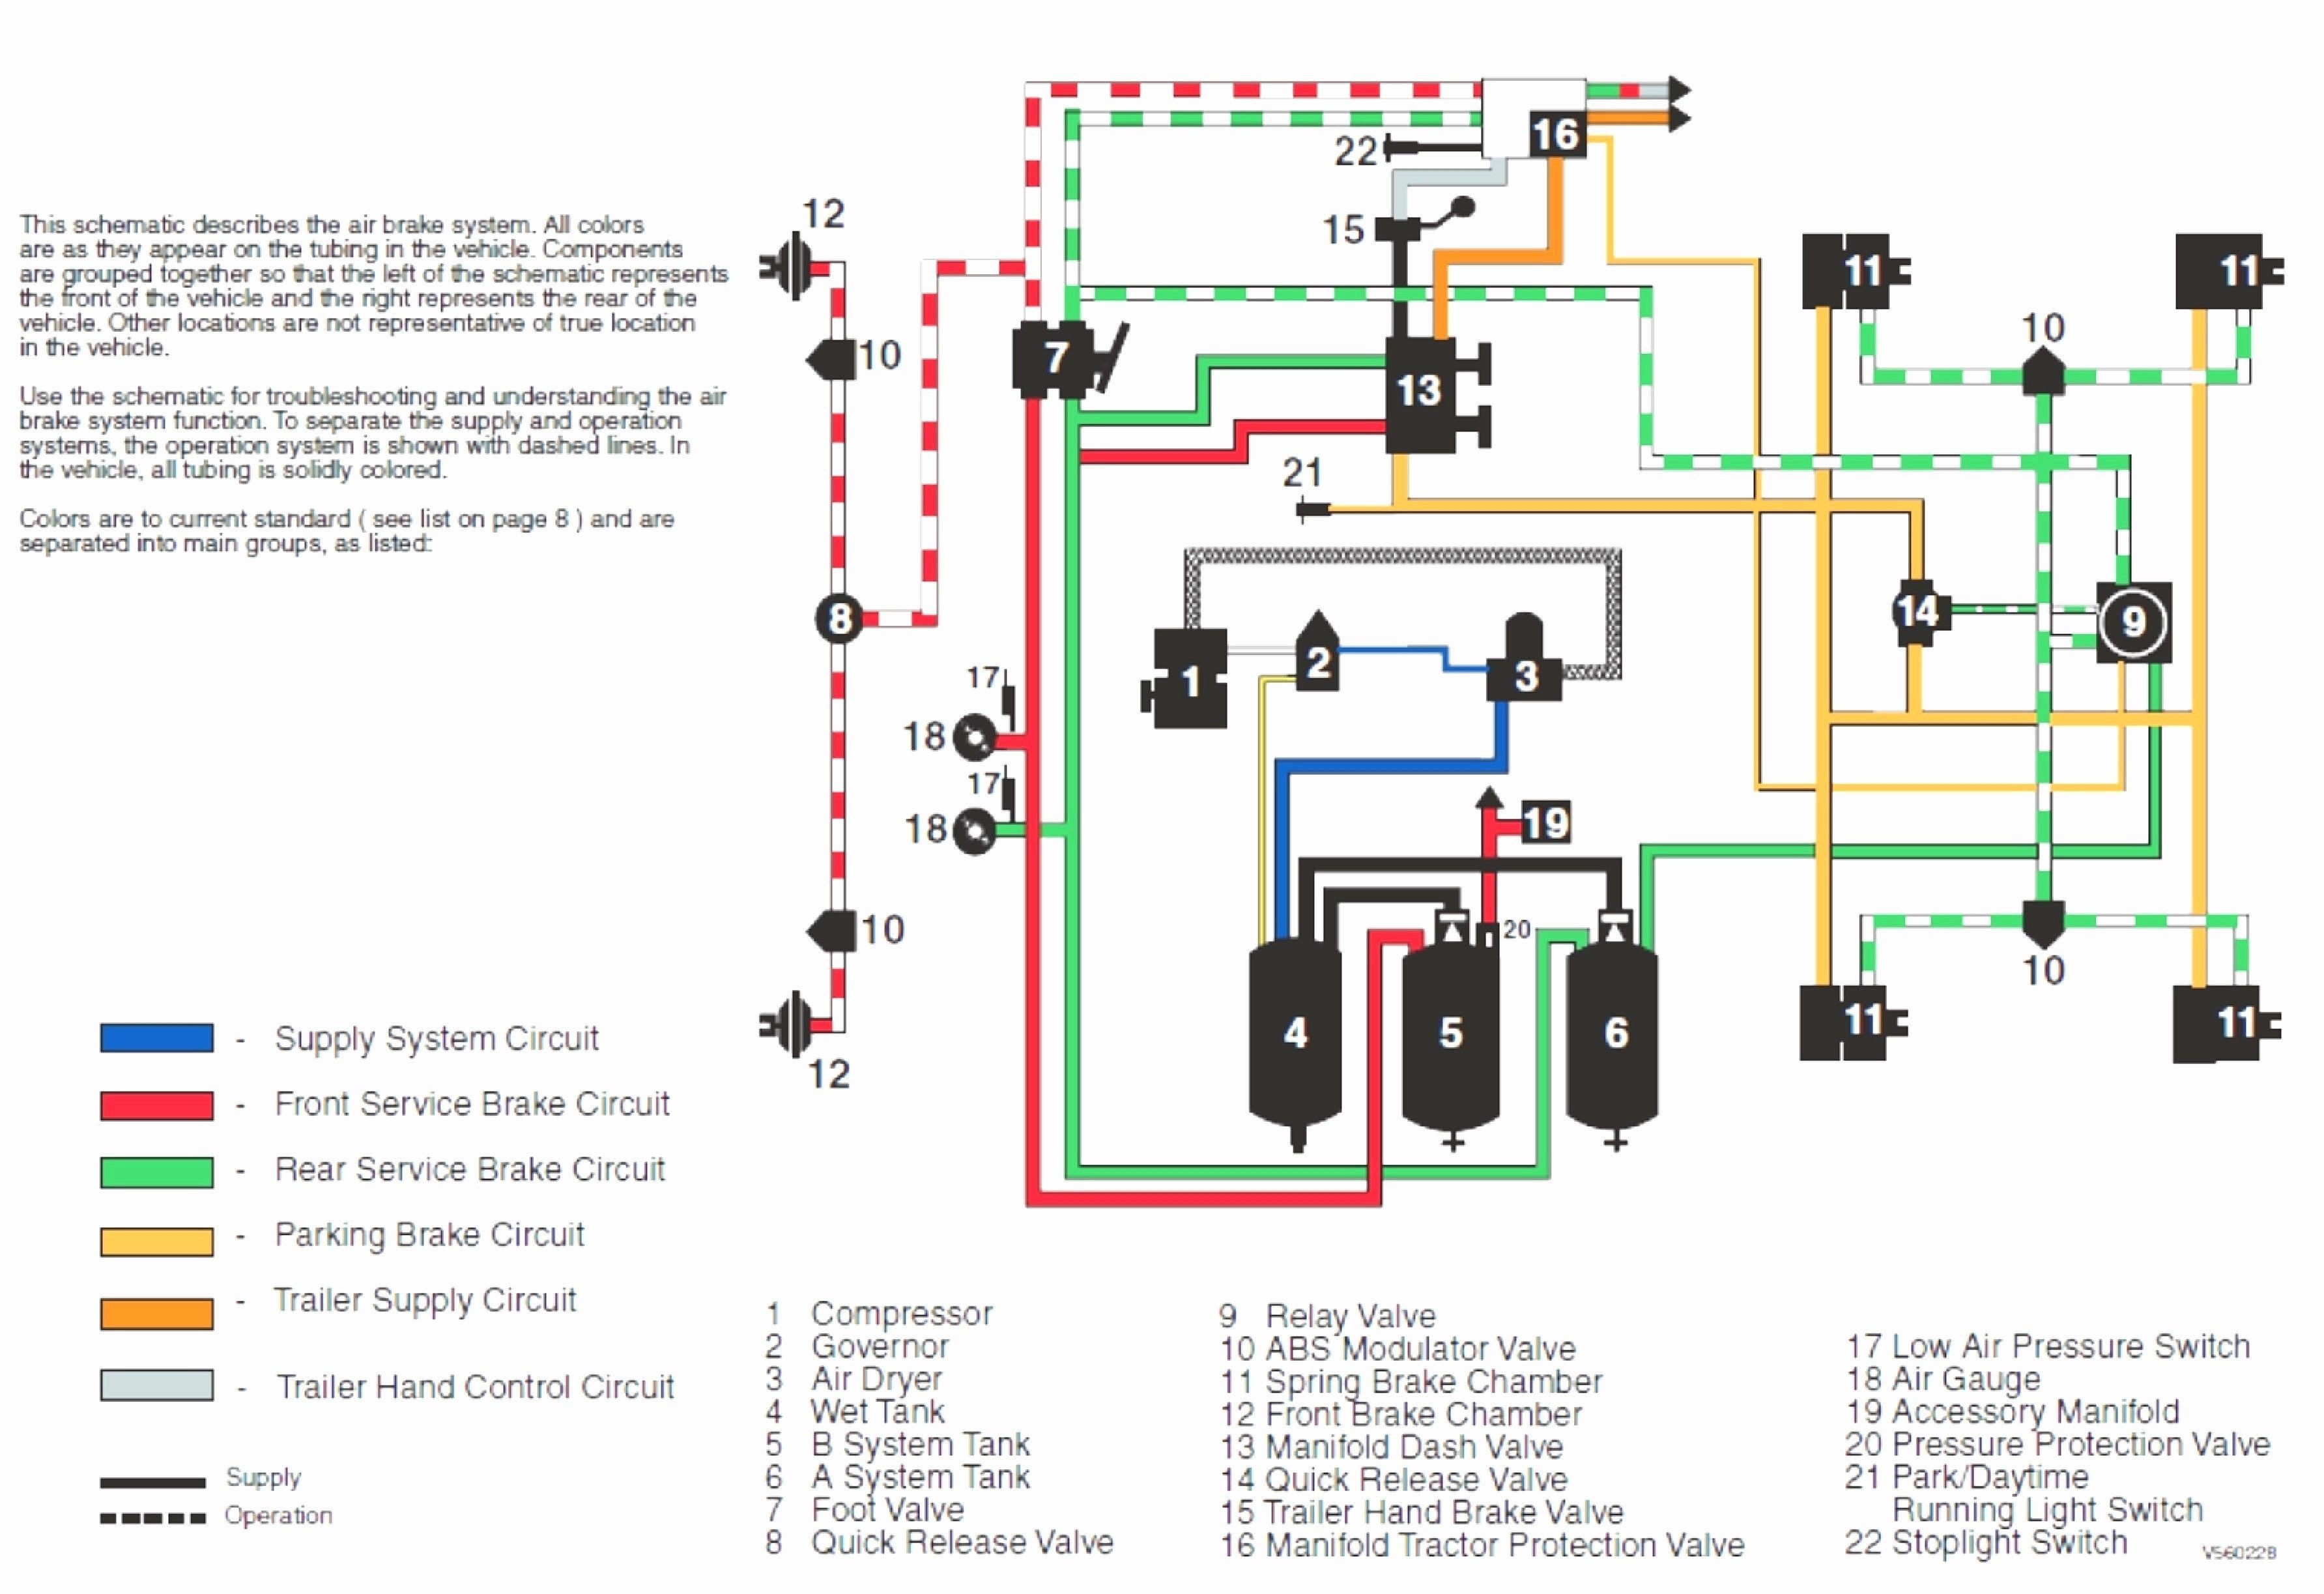 Grote Lights Wiring Diagram Best Wiring Diagram for Daytime Running Lights Diagrams Of Grote Lights Wiring Diagram